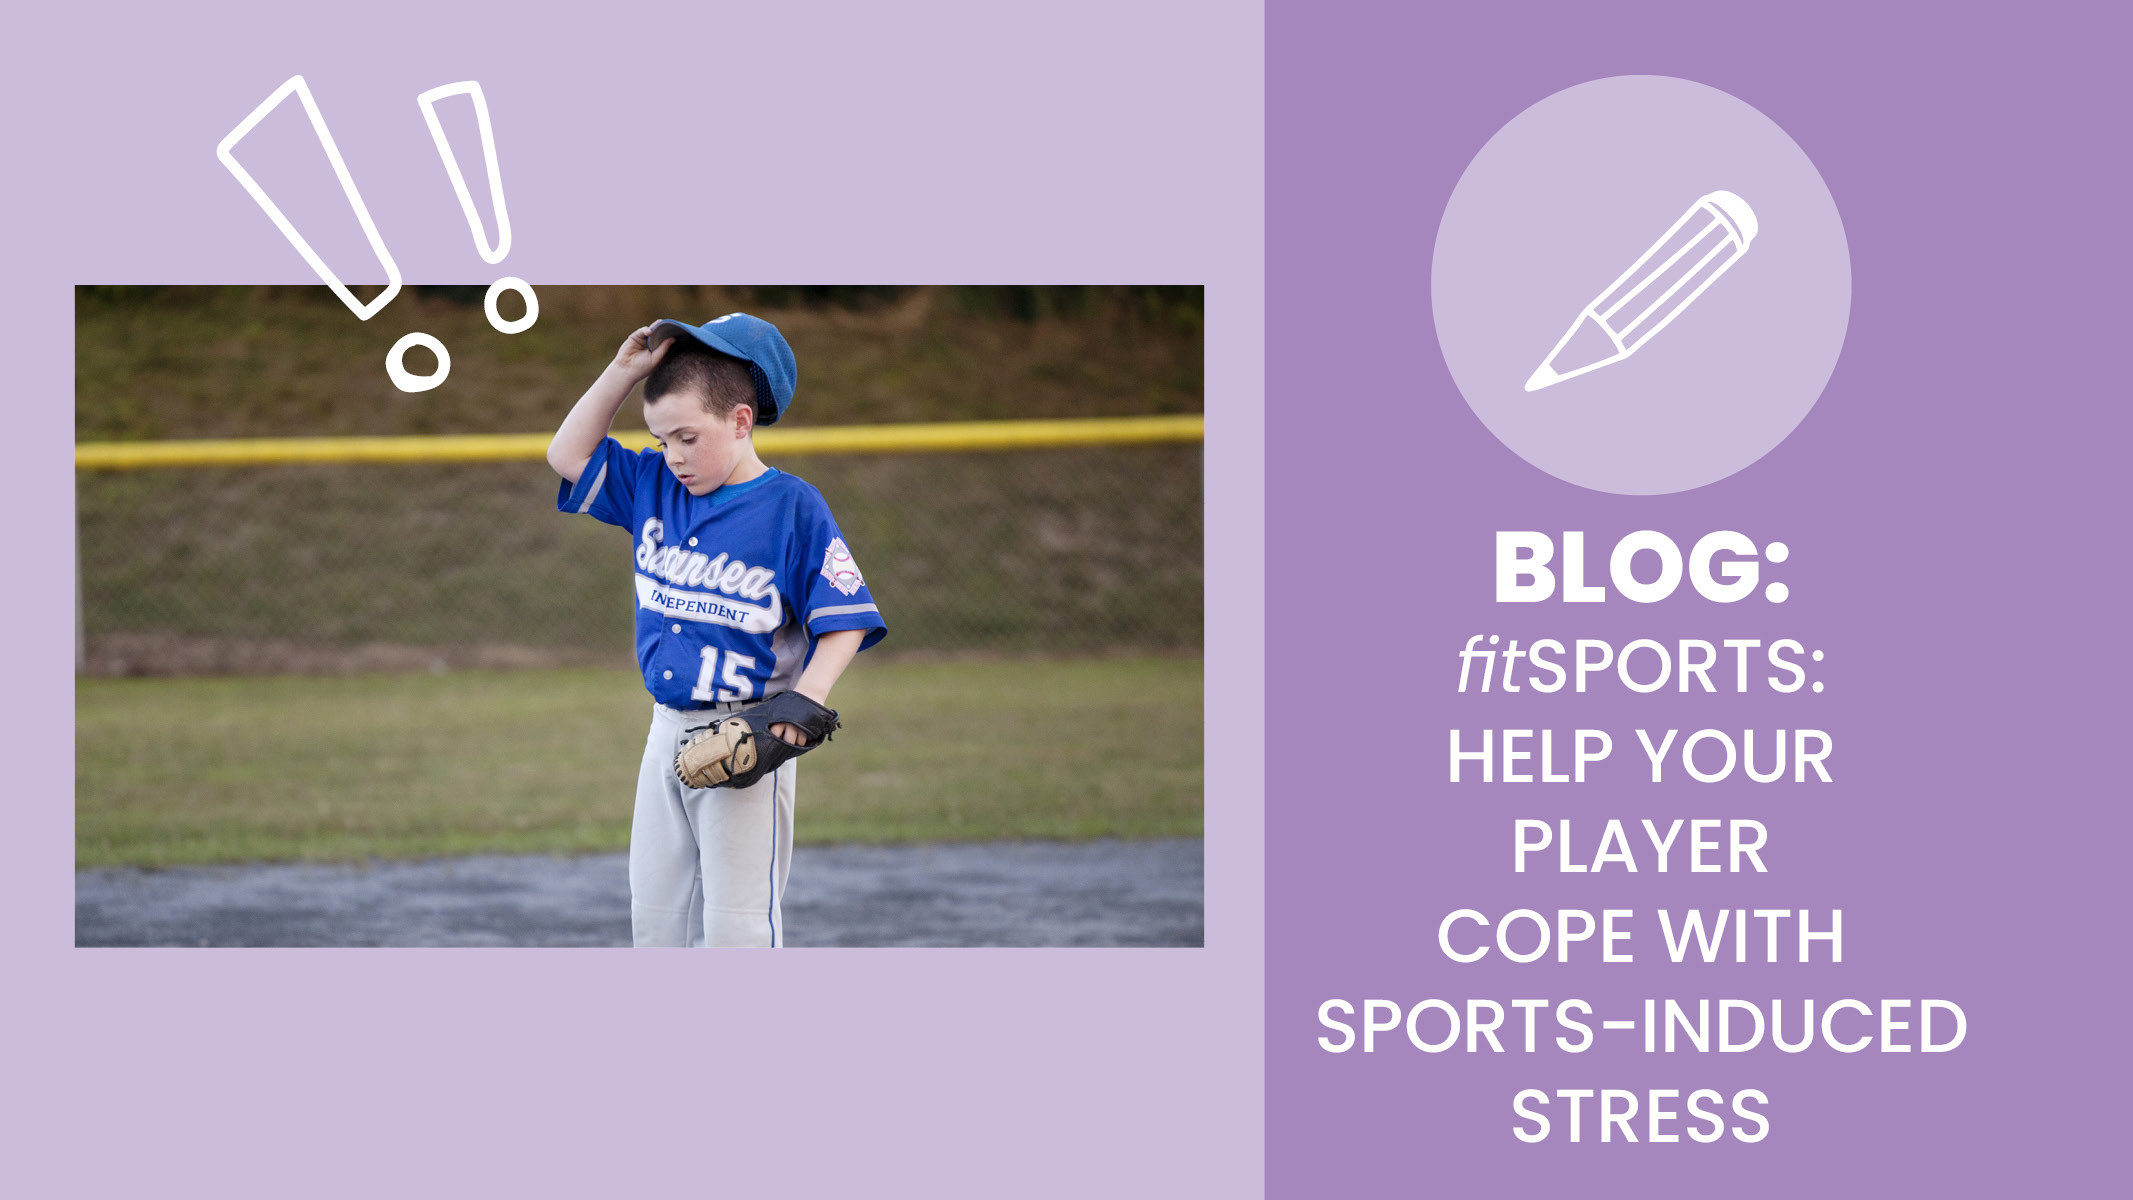 Young child, boy, feels stress while playing baseball